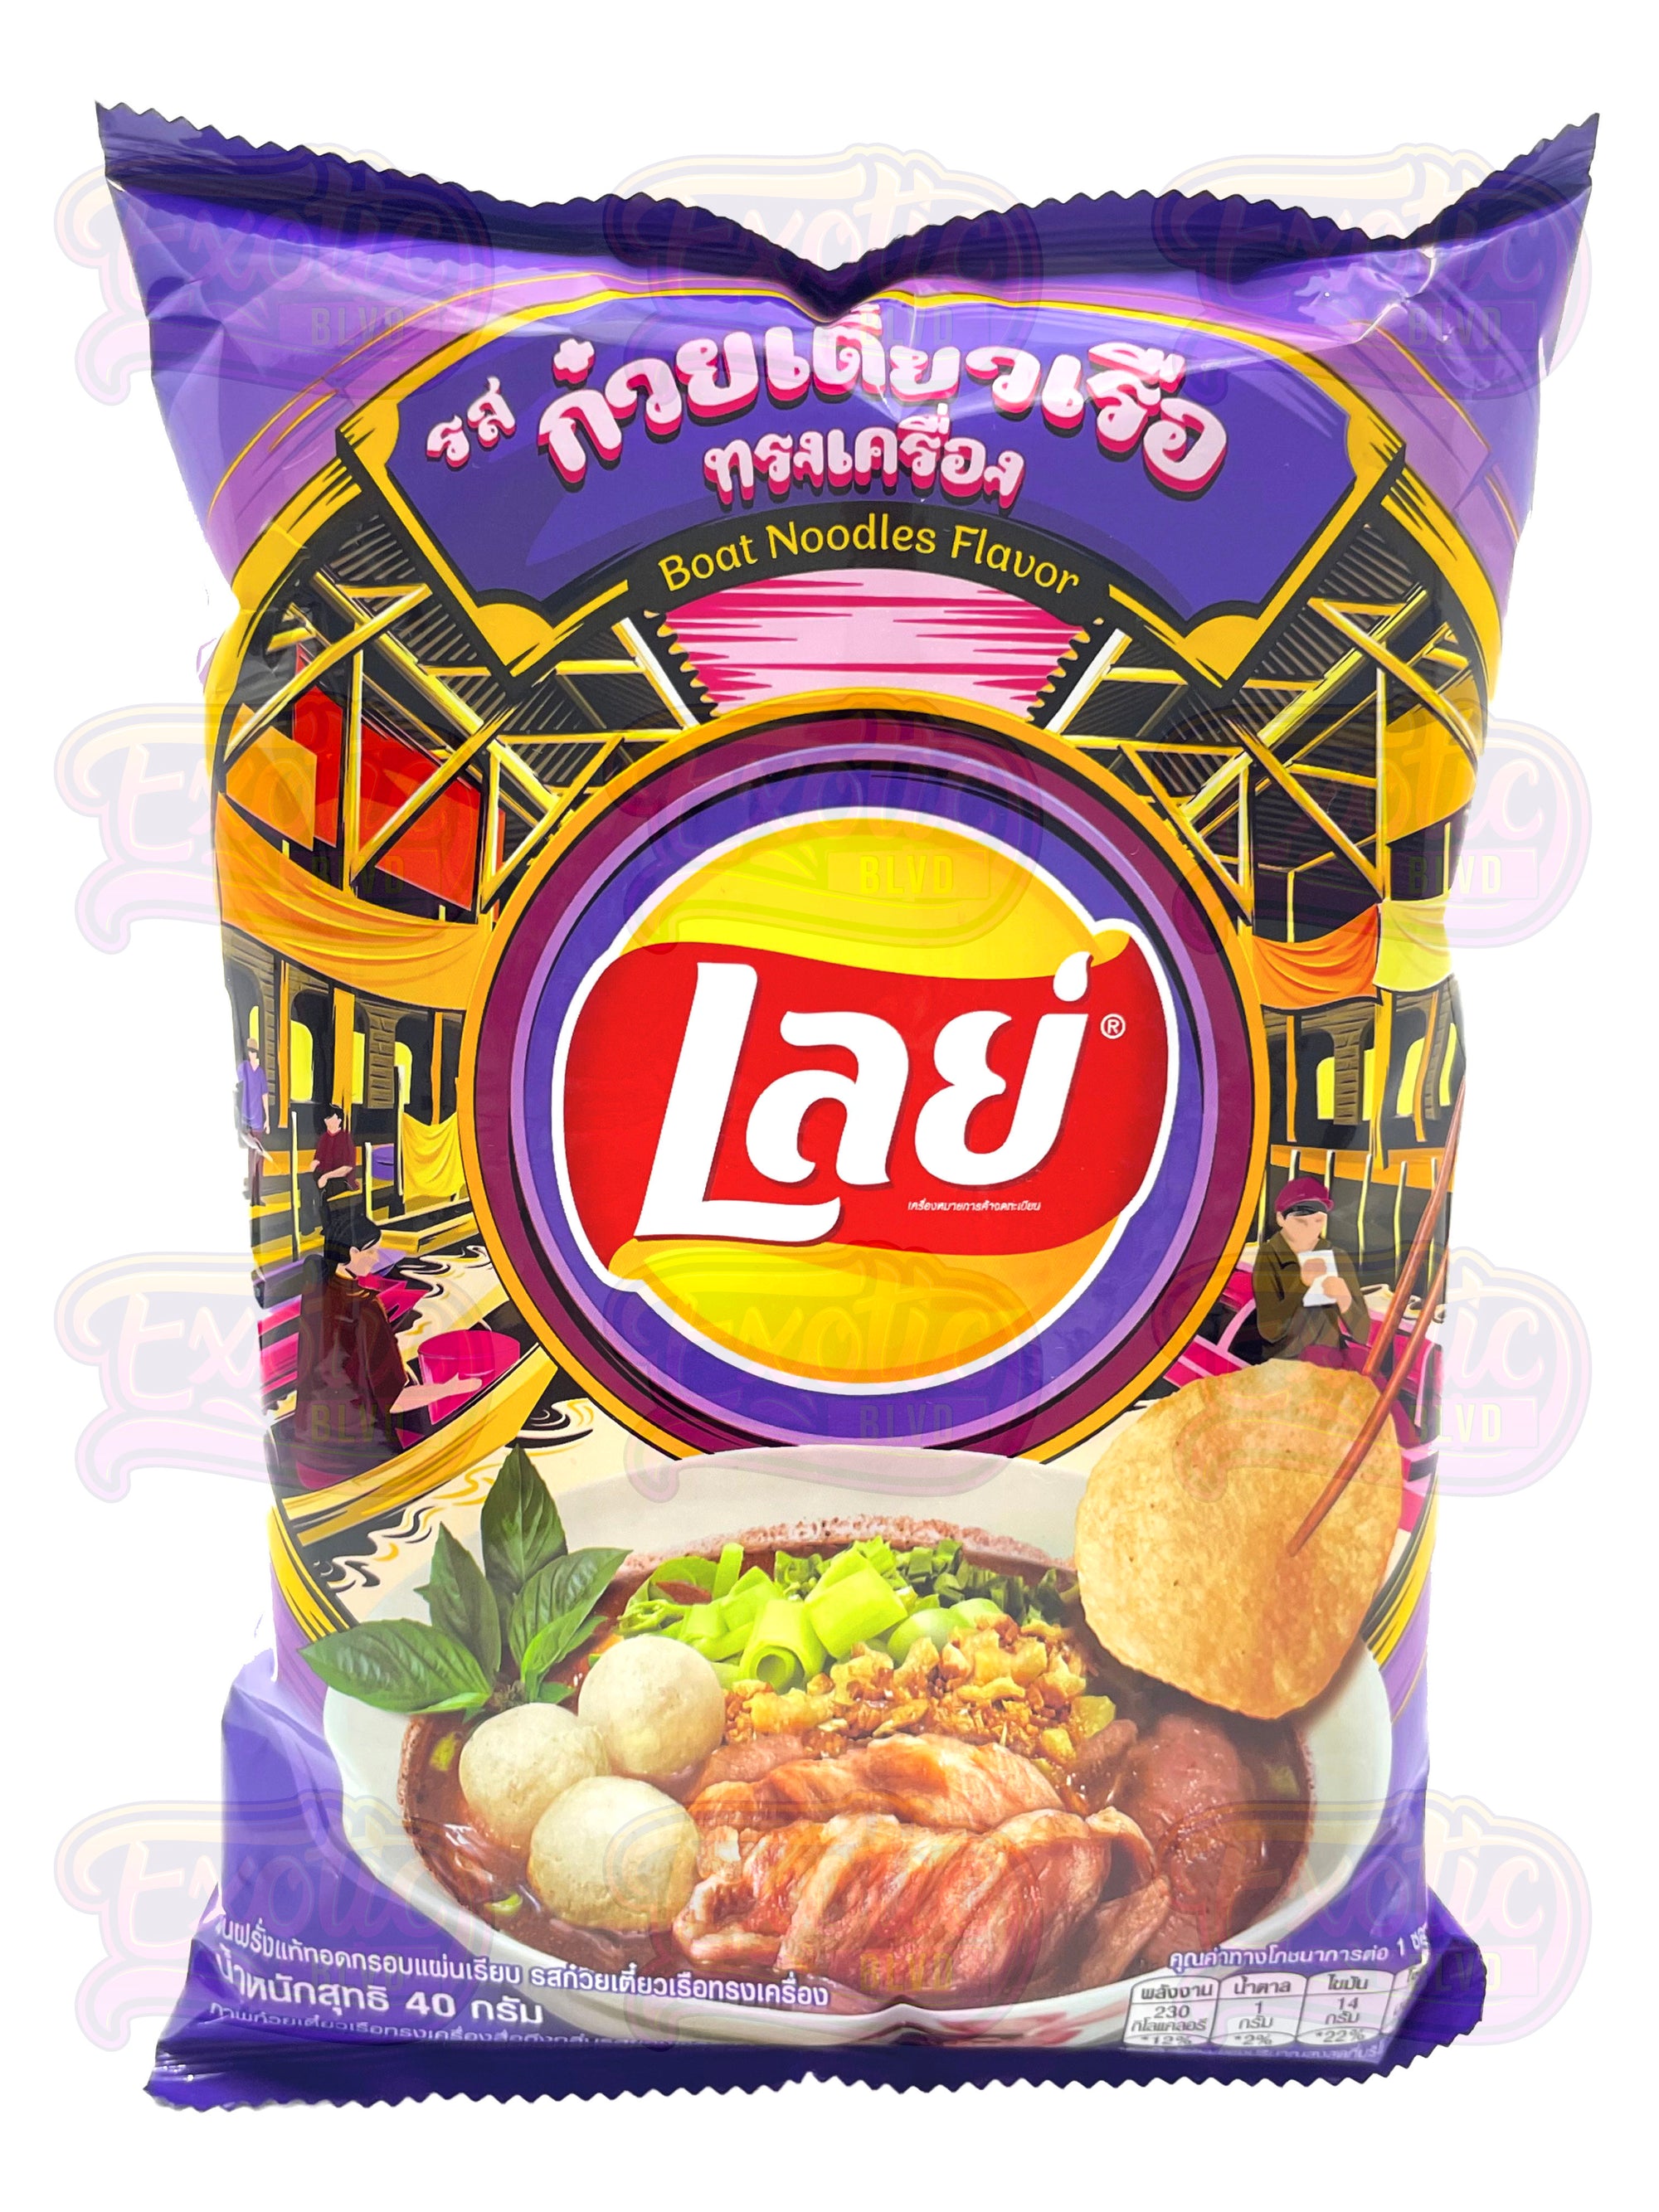 Lay's Stax Boat Noodles